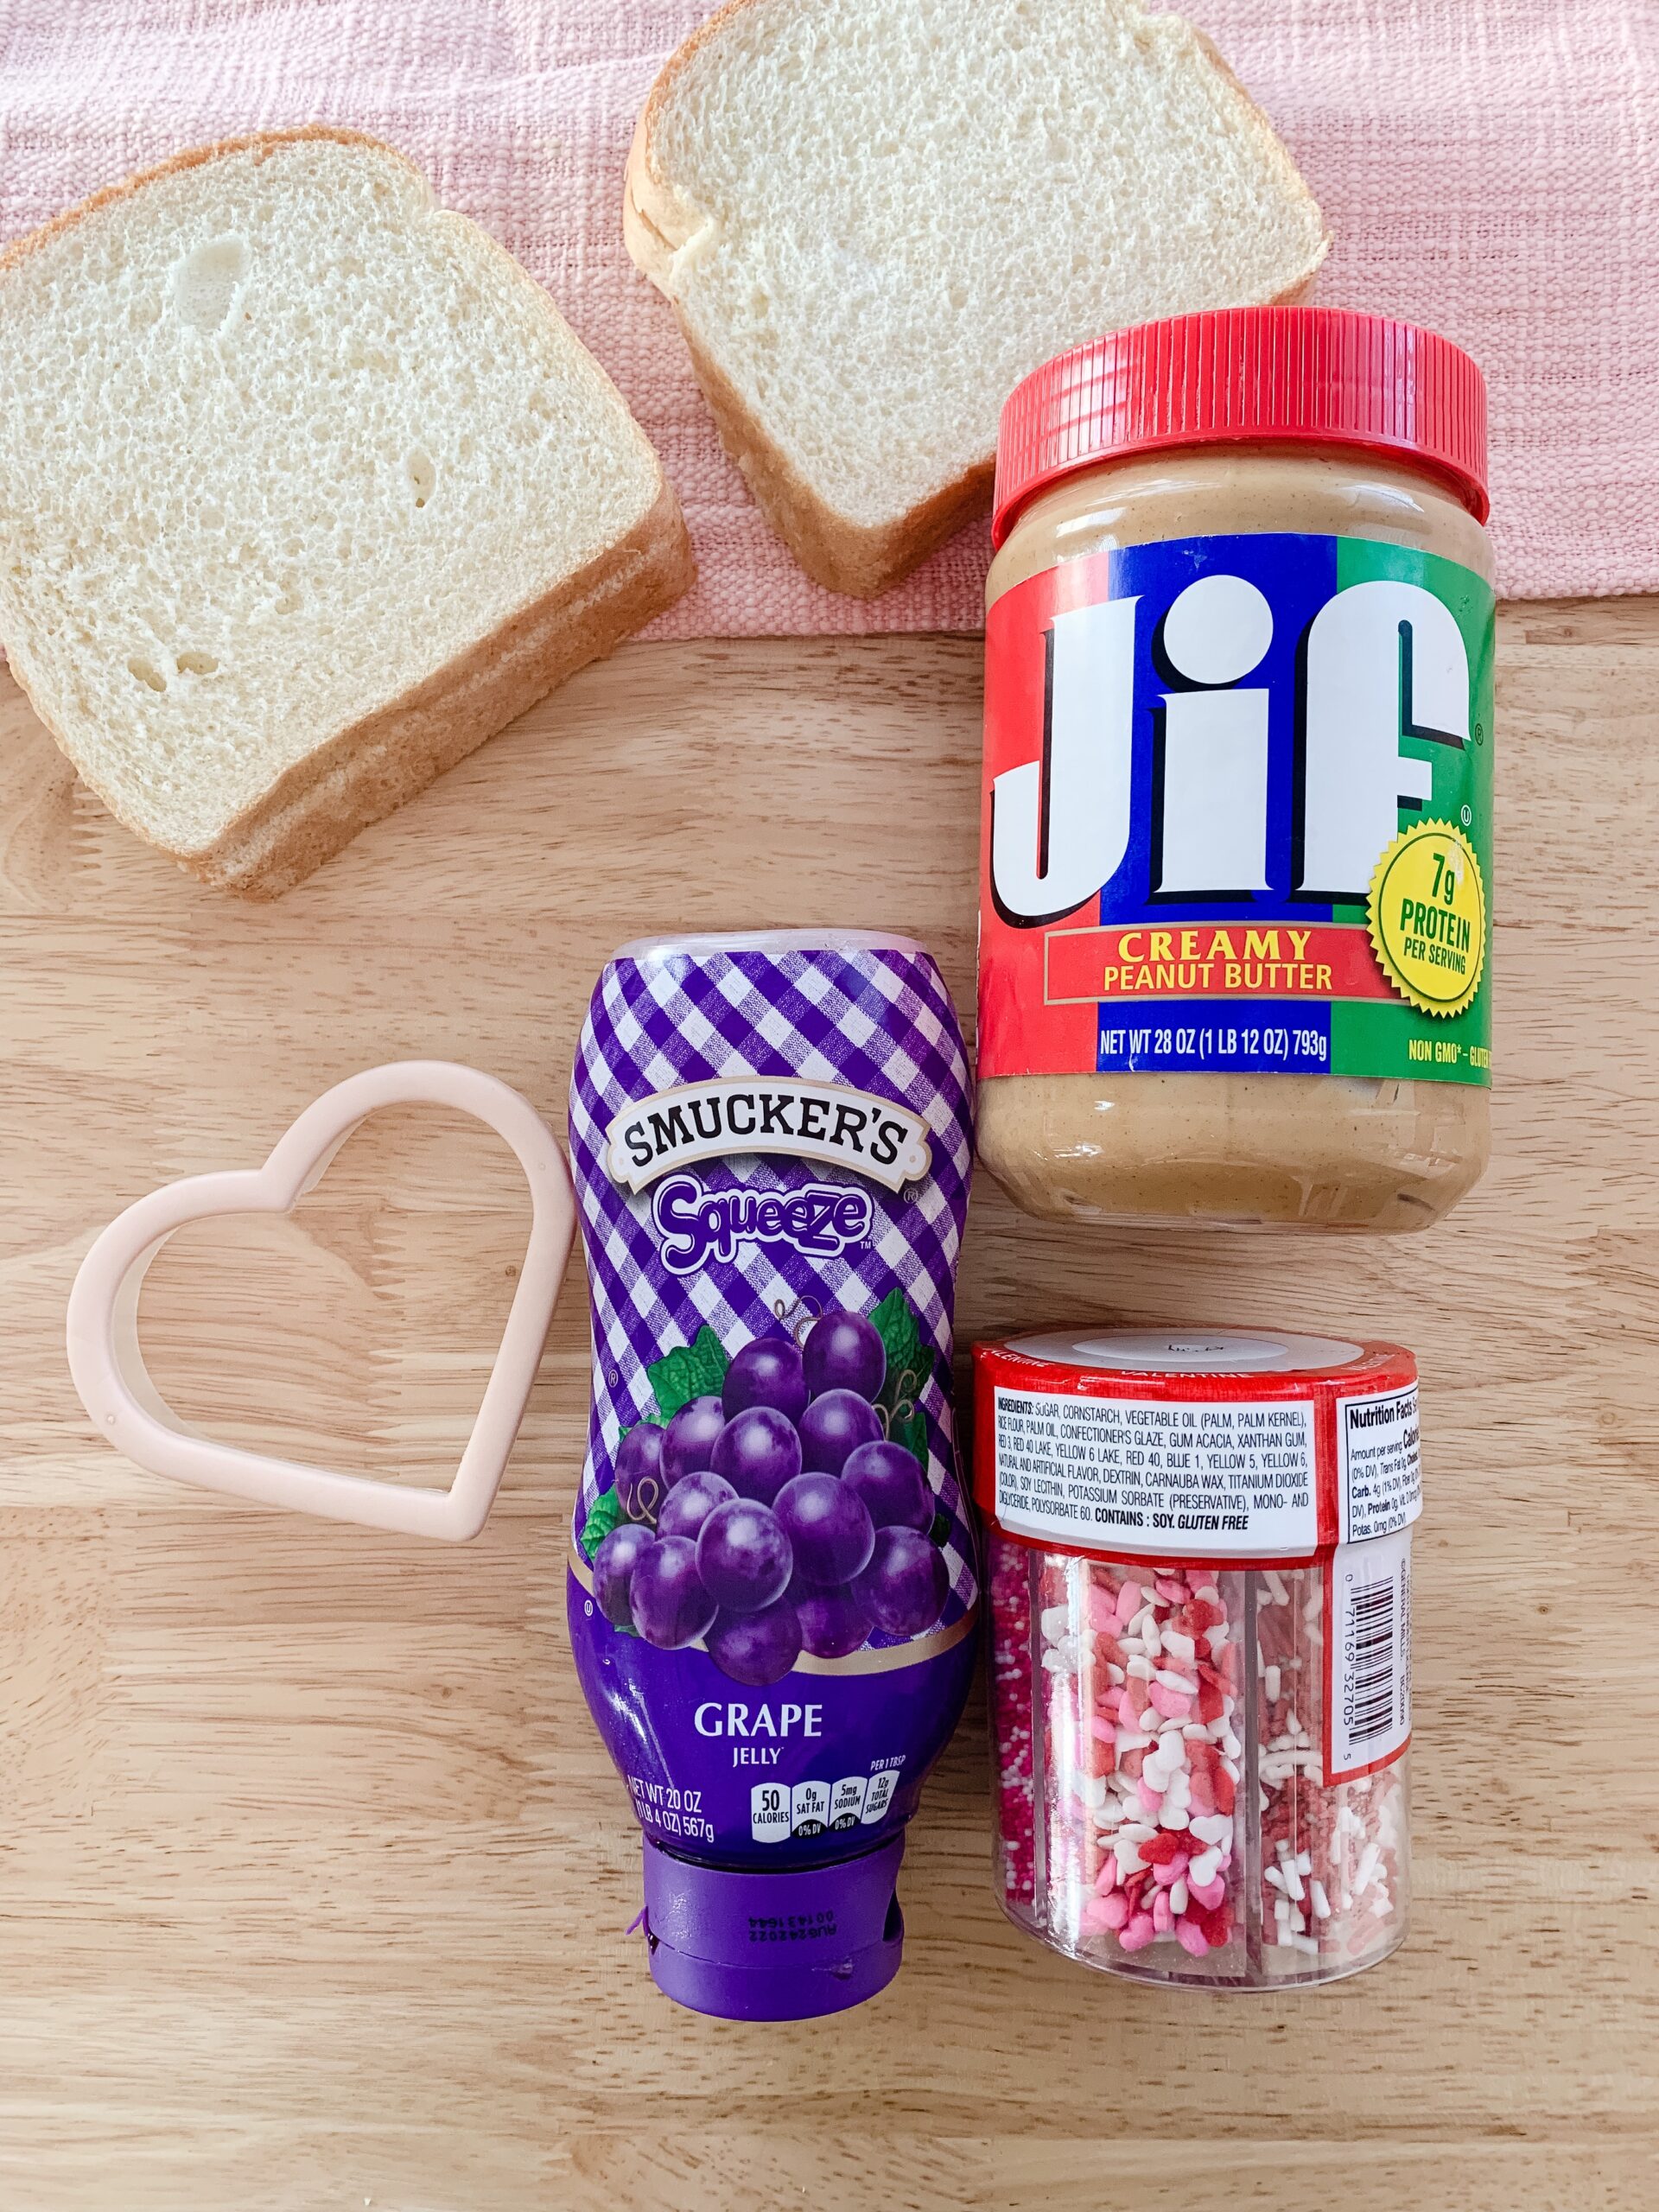 White bread, Jif peanut butter, smucker's grape jelly, Valentine's sprinkles and a heart shaped cookie cutter